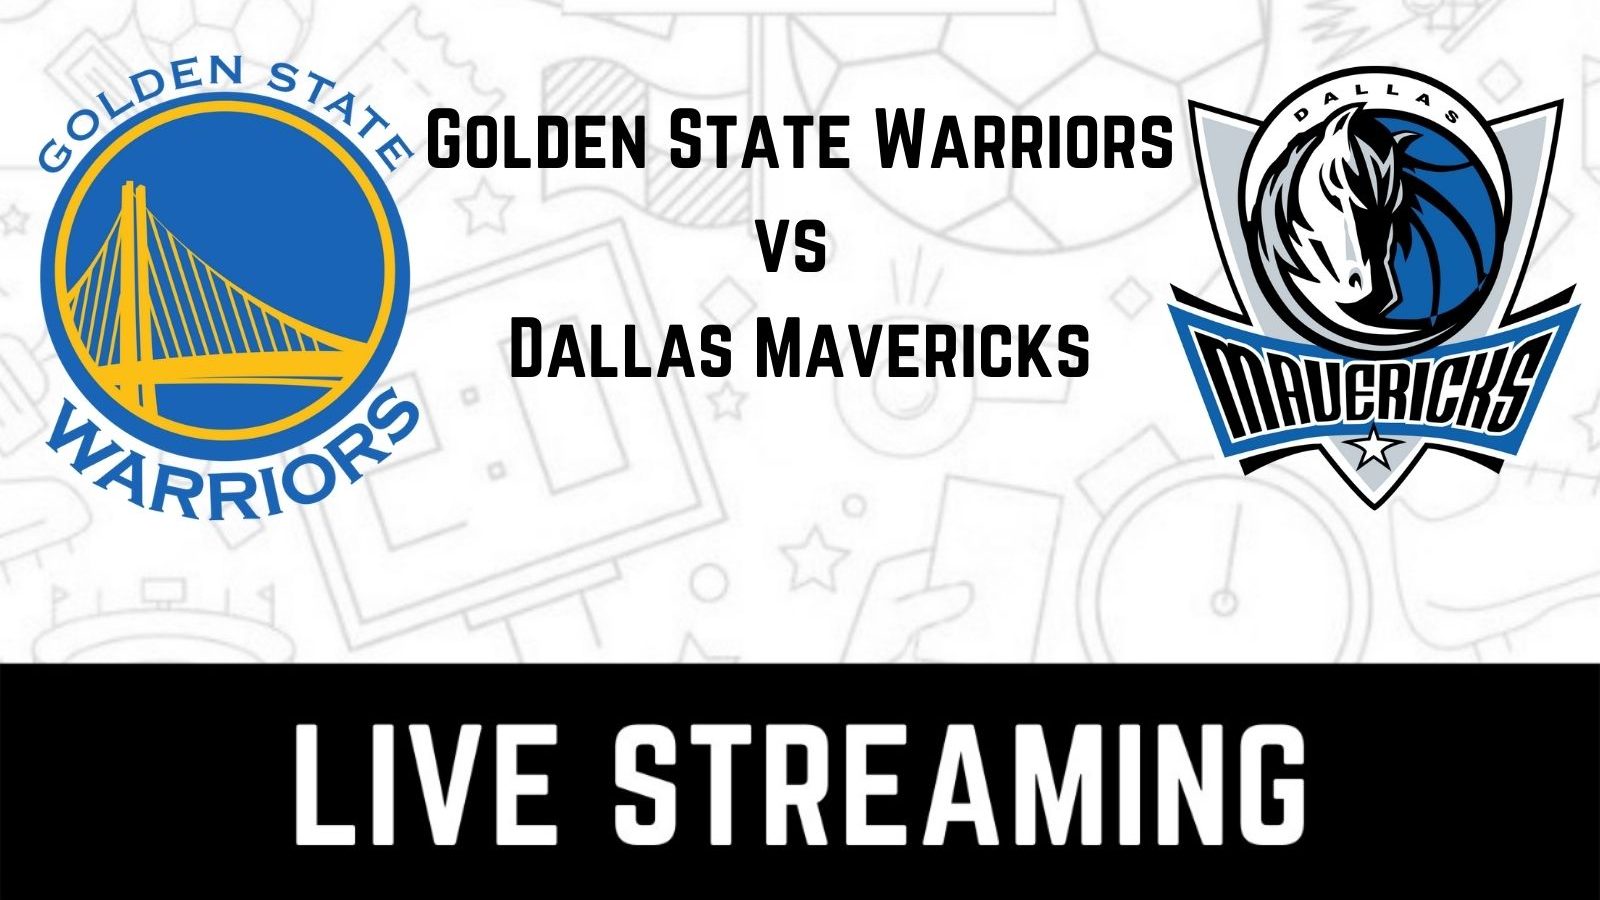 Dallas Mavericks Vs Golden State Warriors Live Streaming When And Where To Watch Nba 2022